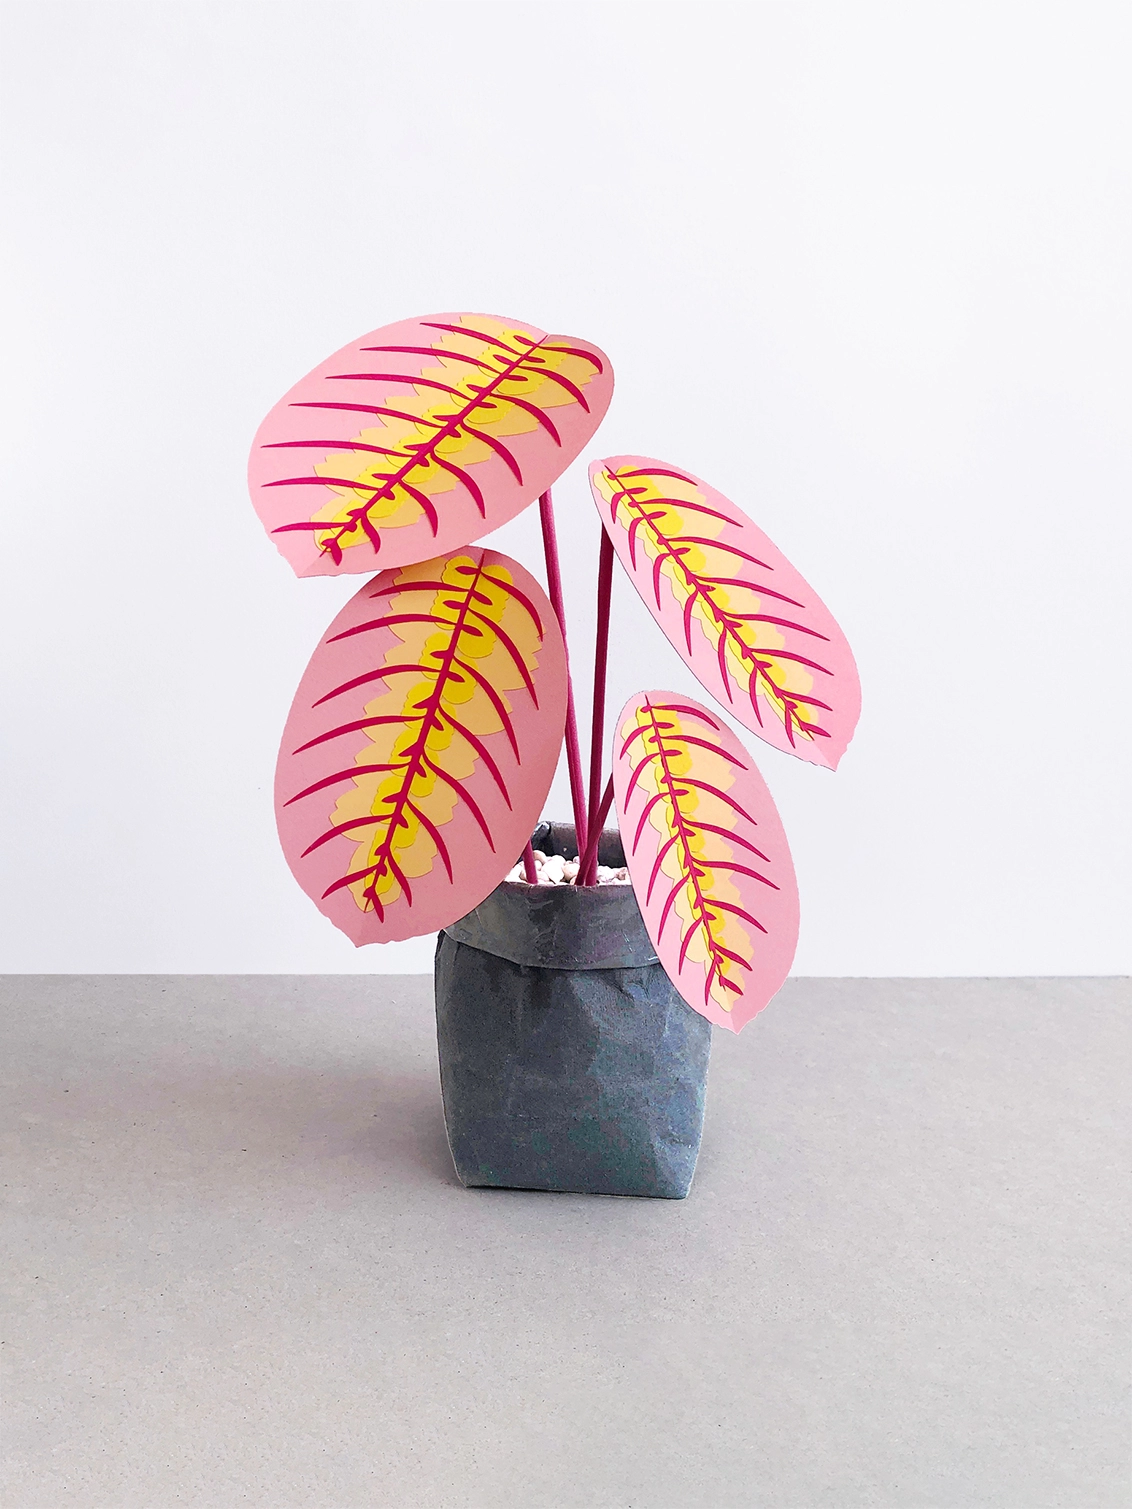 pink artificial plant by Brazen Botany